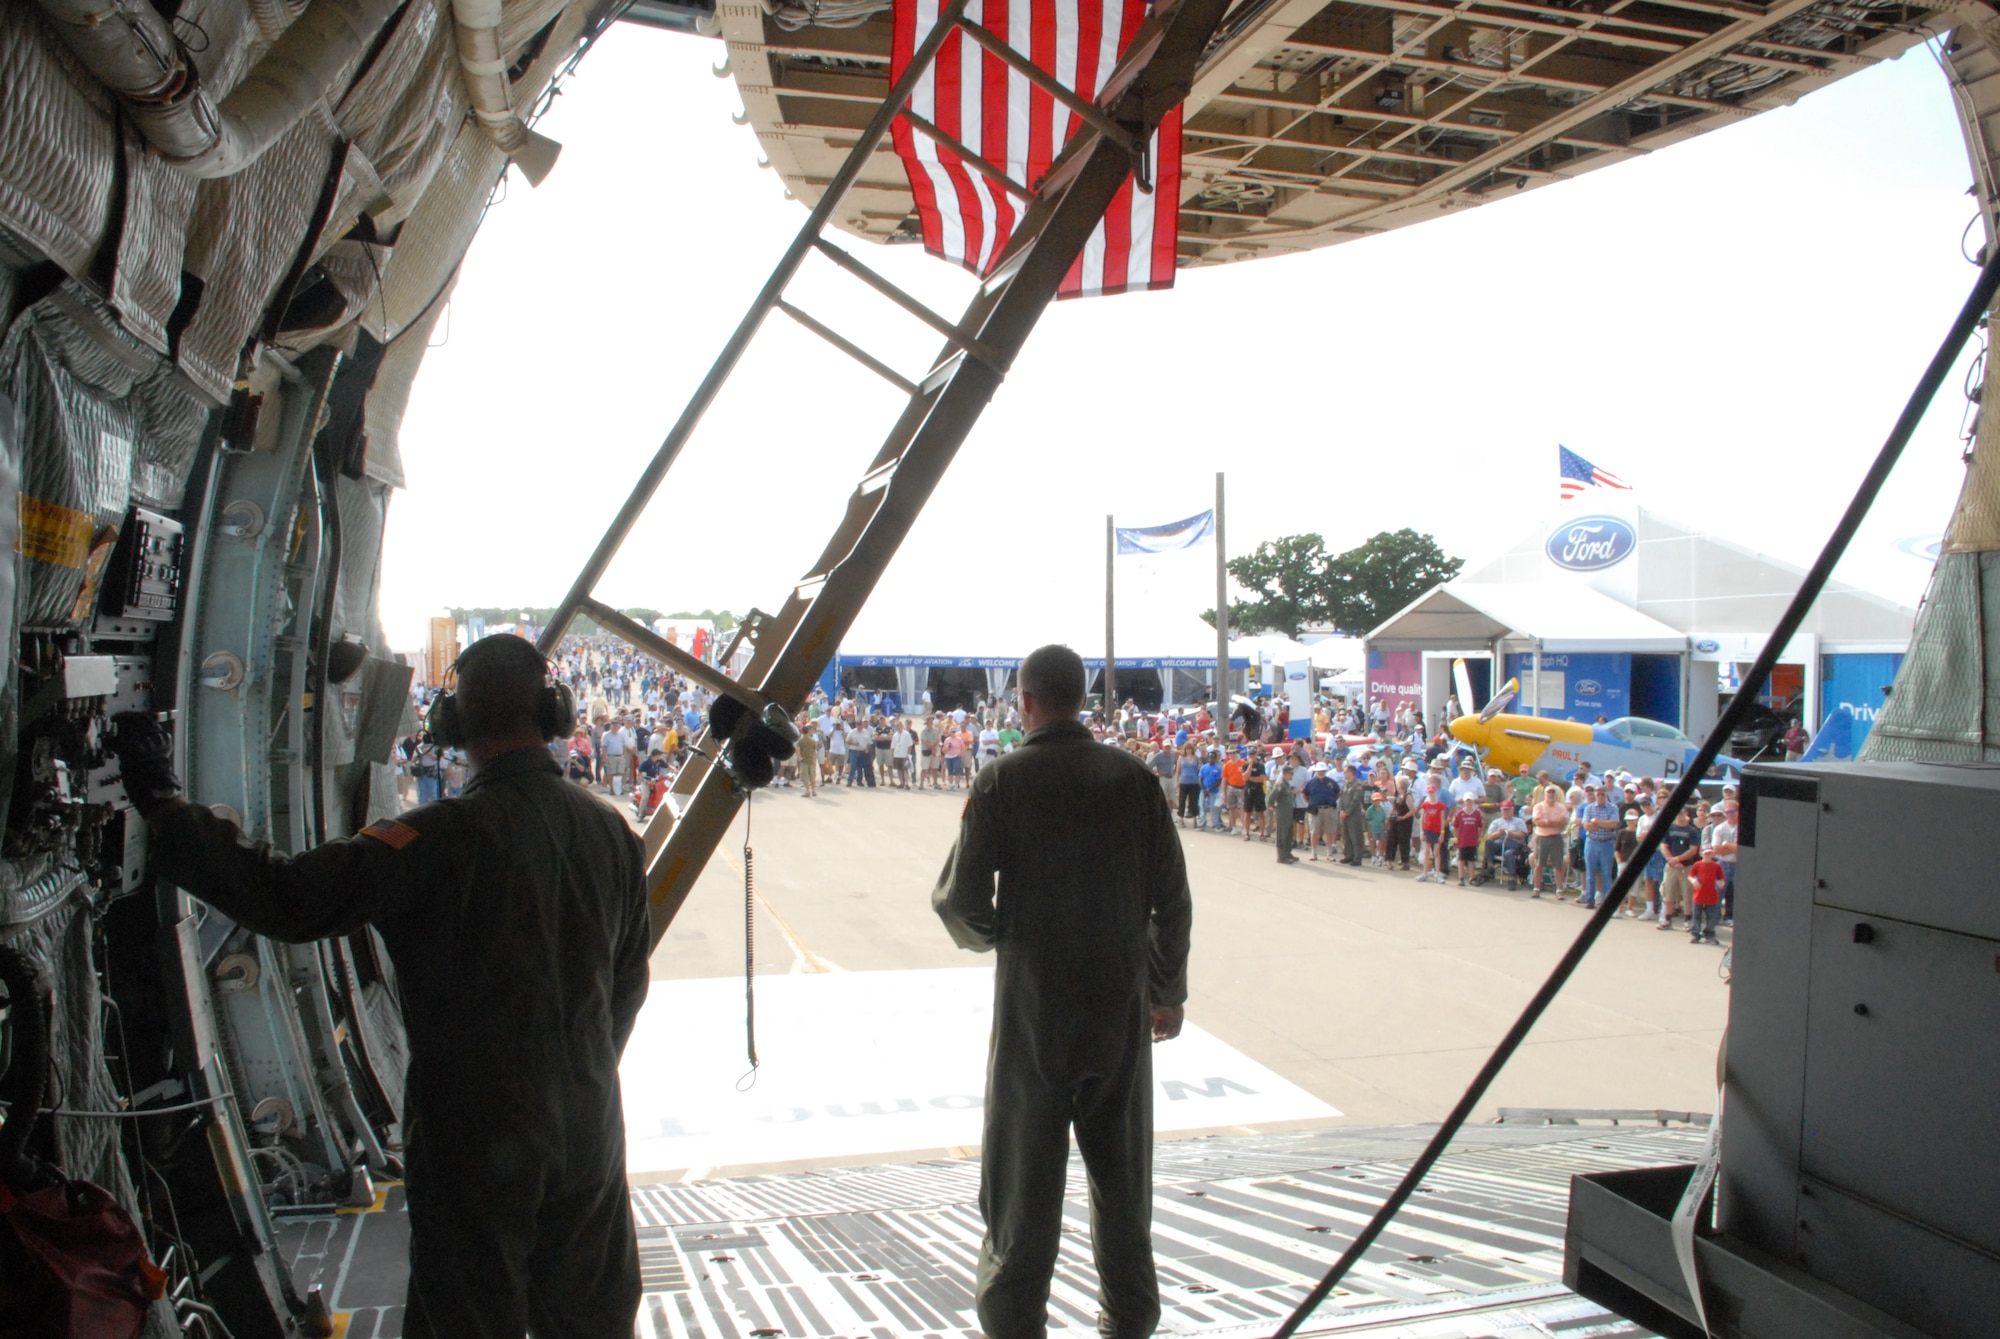 Team Dover members prepare the C-5M Super Galaxy for visitors during the EAA AirVenture Oshkosh.  More than 10,000 guests toured the aircraft during The Spirit of Normandy?s two-day visit to the event.  (U.S. Air Force photo/Staff Sgt. Chad Padgett)